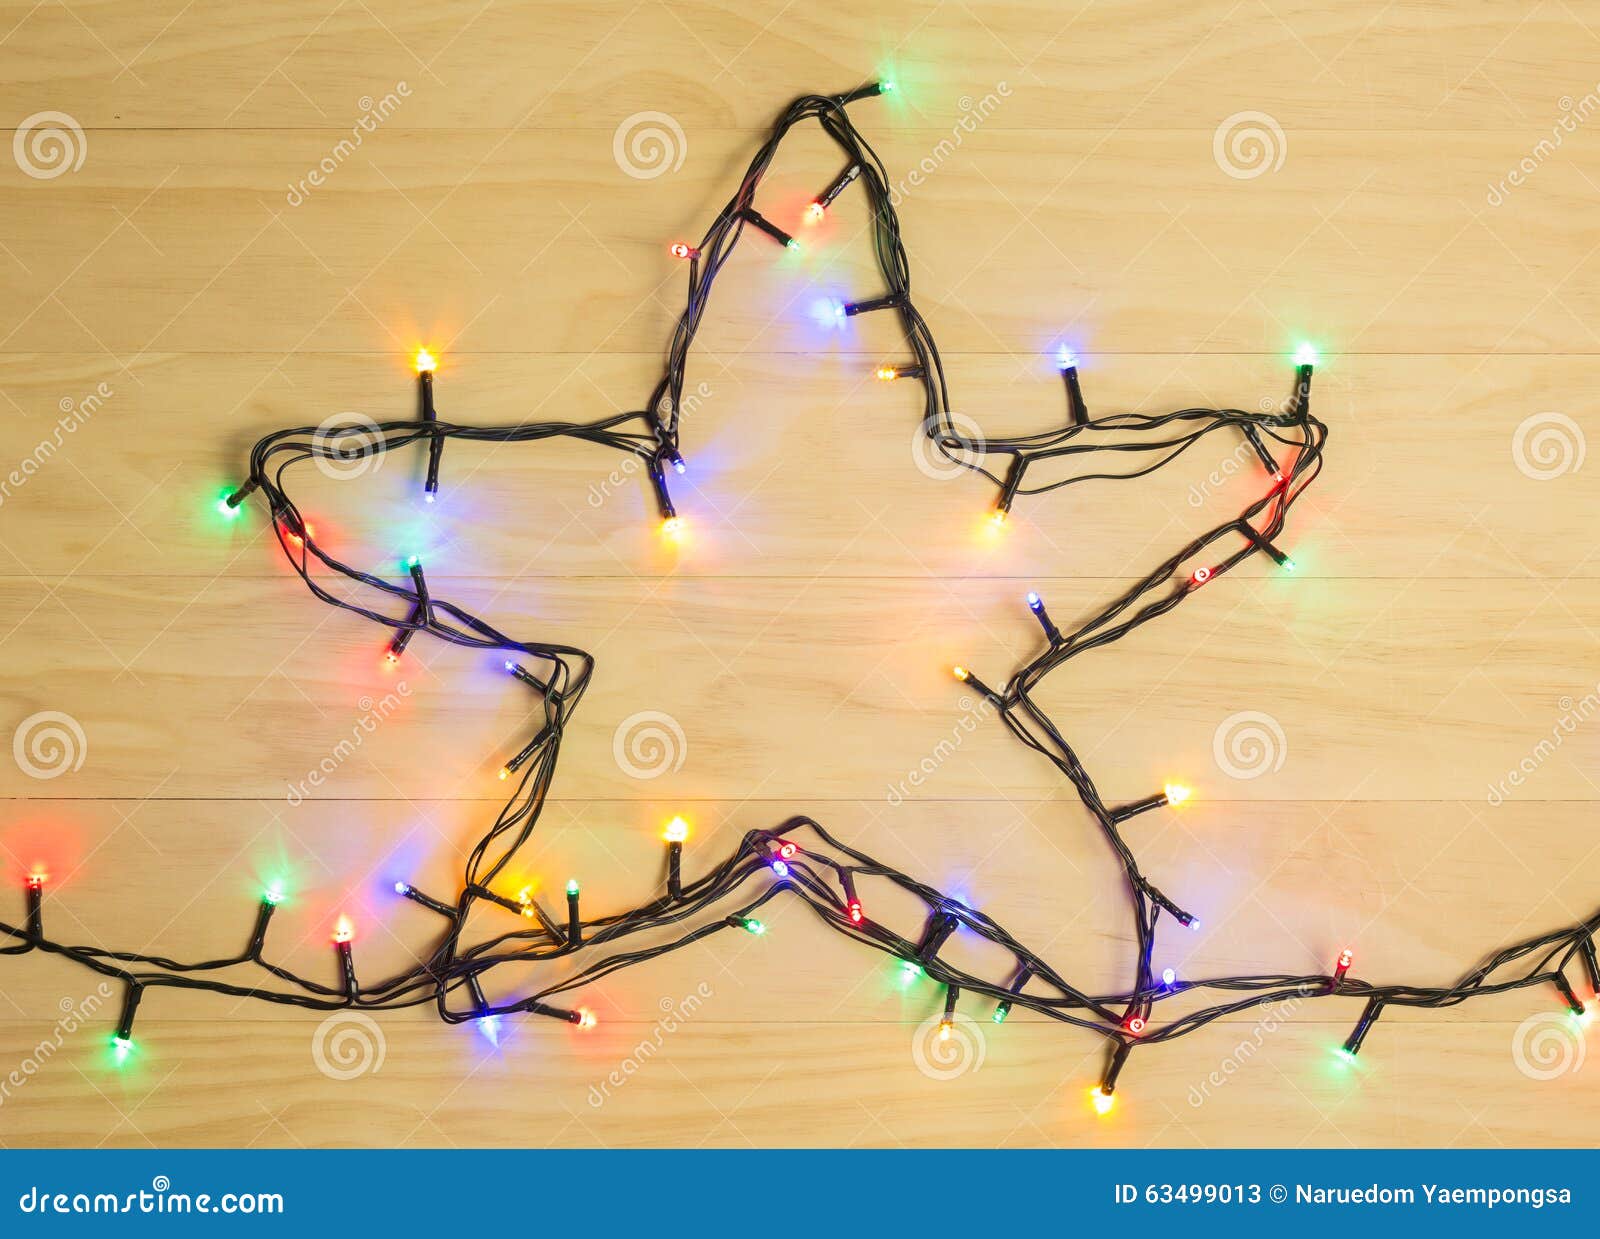 Christmas Lights in Star Shape Stock Image - of color, 63499013